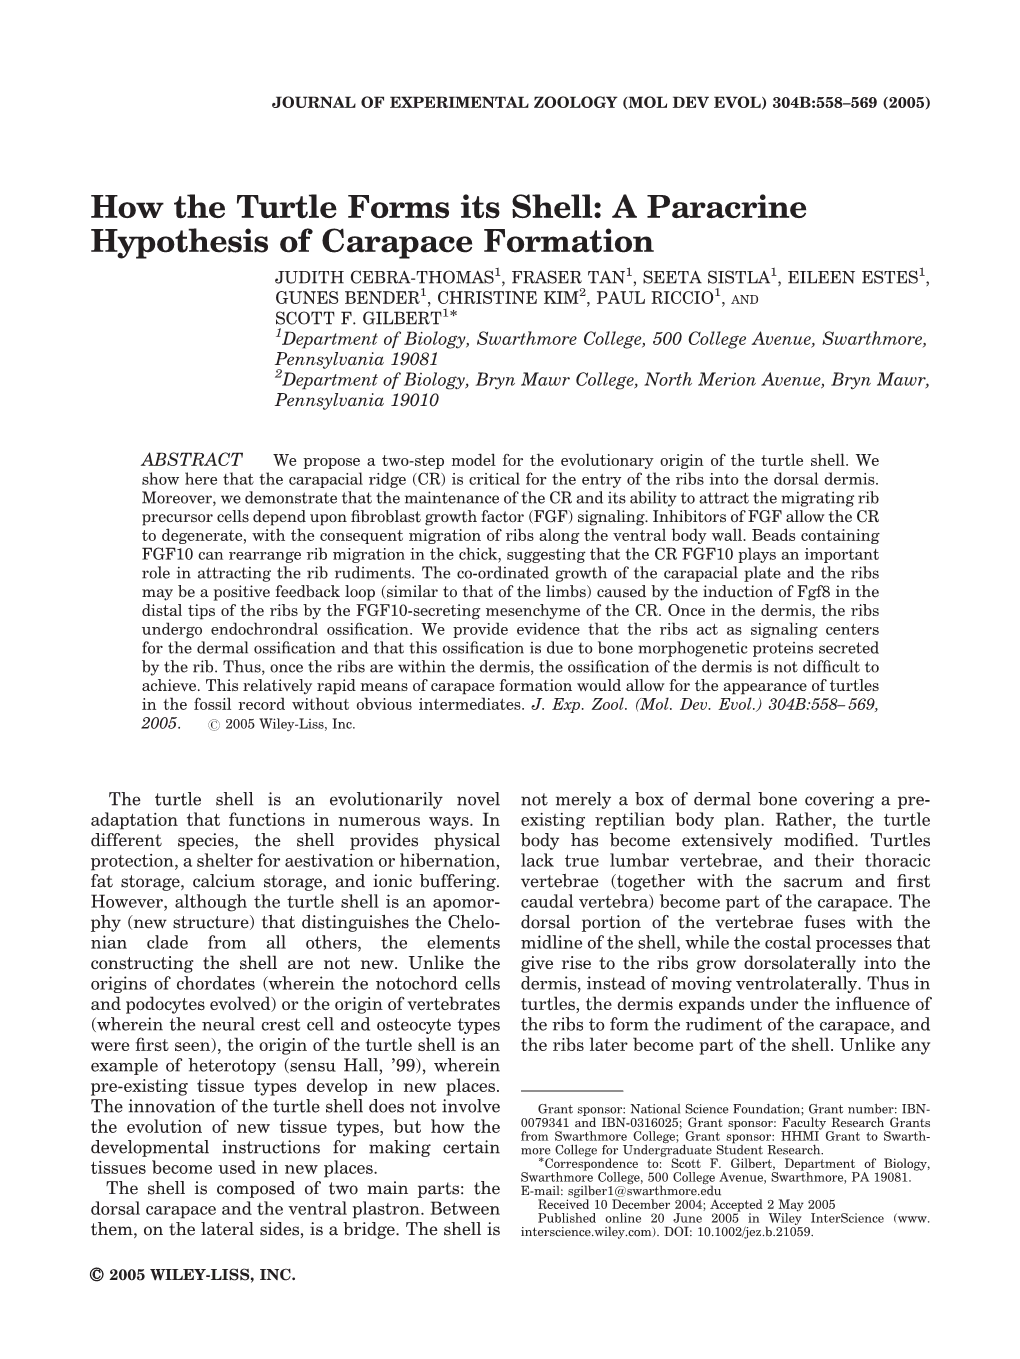 How the Turtle Forms Its Shell: a Paracrine Hypothesis of Carapace